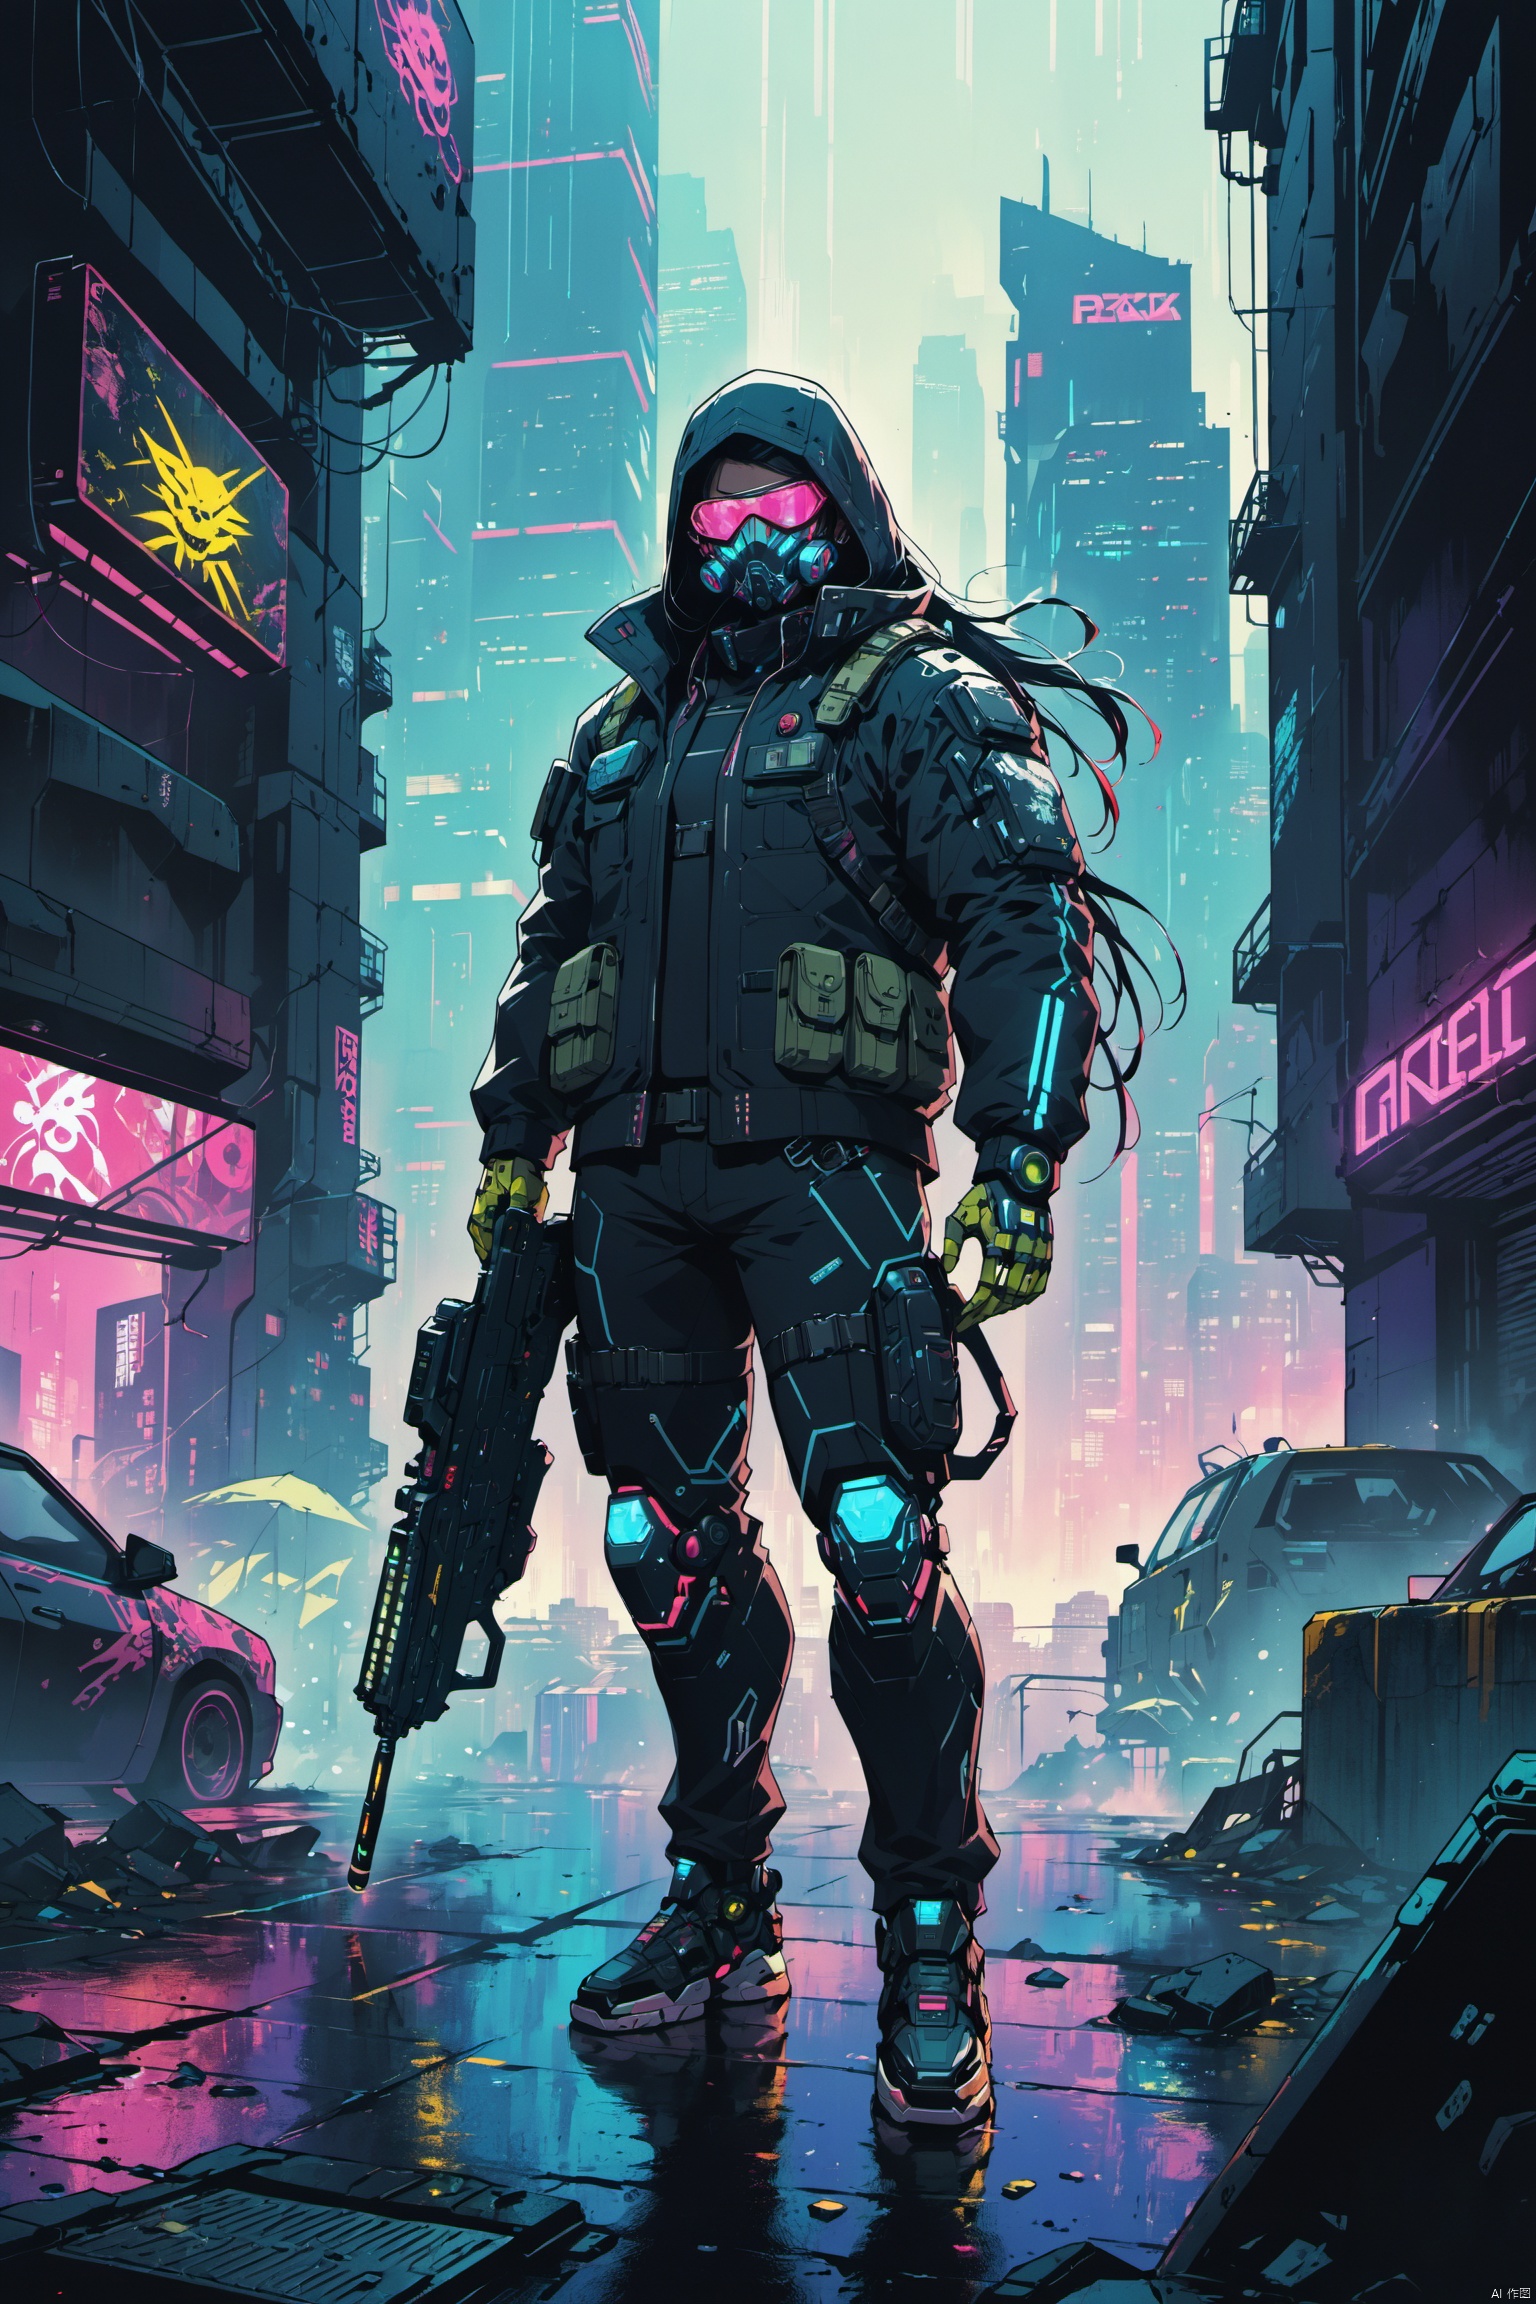 1Cyberpunk 2077-inspired character, full-body render, dressed in a custom-fit Kiroshi Optics augmented reality suit, complete with reactive color-changing panels and programmable LED patterns, heavily-modified cyberlimbs equipped with retractable blades, smart-gun integration, and kinetic dampeners, numerous chrome-plated implants glistening under the rain-soaked city's neons, facial augmentations including ocular implants with datascroll functionality and subdermal commlink, breathing mask concealing identity while providing air filtration in the toxic urban jungle, armored jacket with embedded armor plating and quick-release compartments for stash and ammunition, stood confidently on the edge of a rundown apartment block overlooking the sprawling megacity of Night City, embodying the gritty, lawless essence of a mercenary living life on the edge in a world ruled by corporate greed and rampant cyber modification..,((anime art style)), ((poakl)), eastern mythology